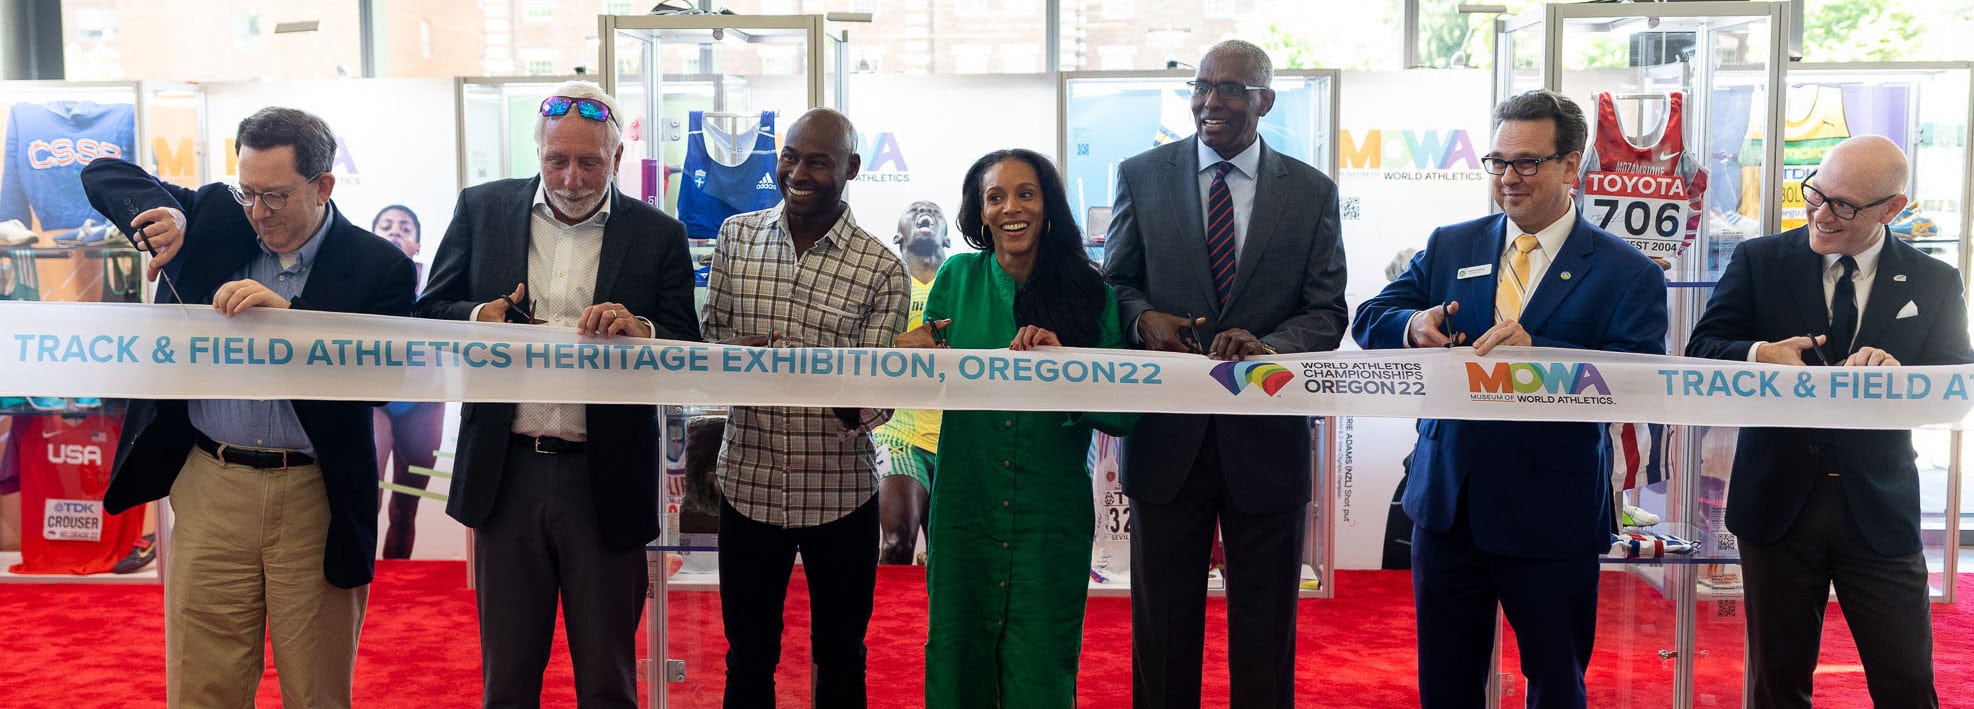 Donations from world champions abdi bile and bernard lagat mark opening of mowa exhibit in eugene